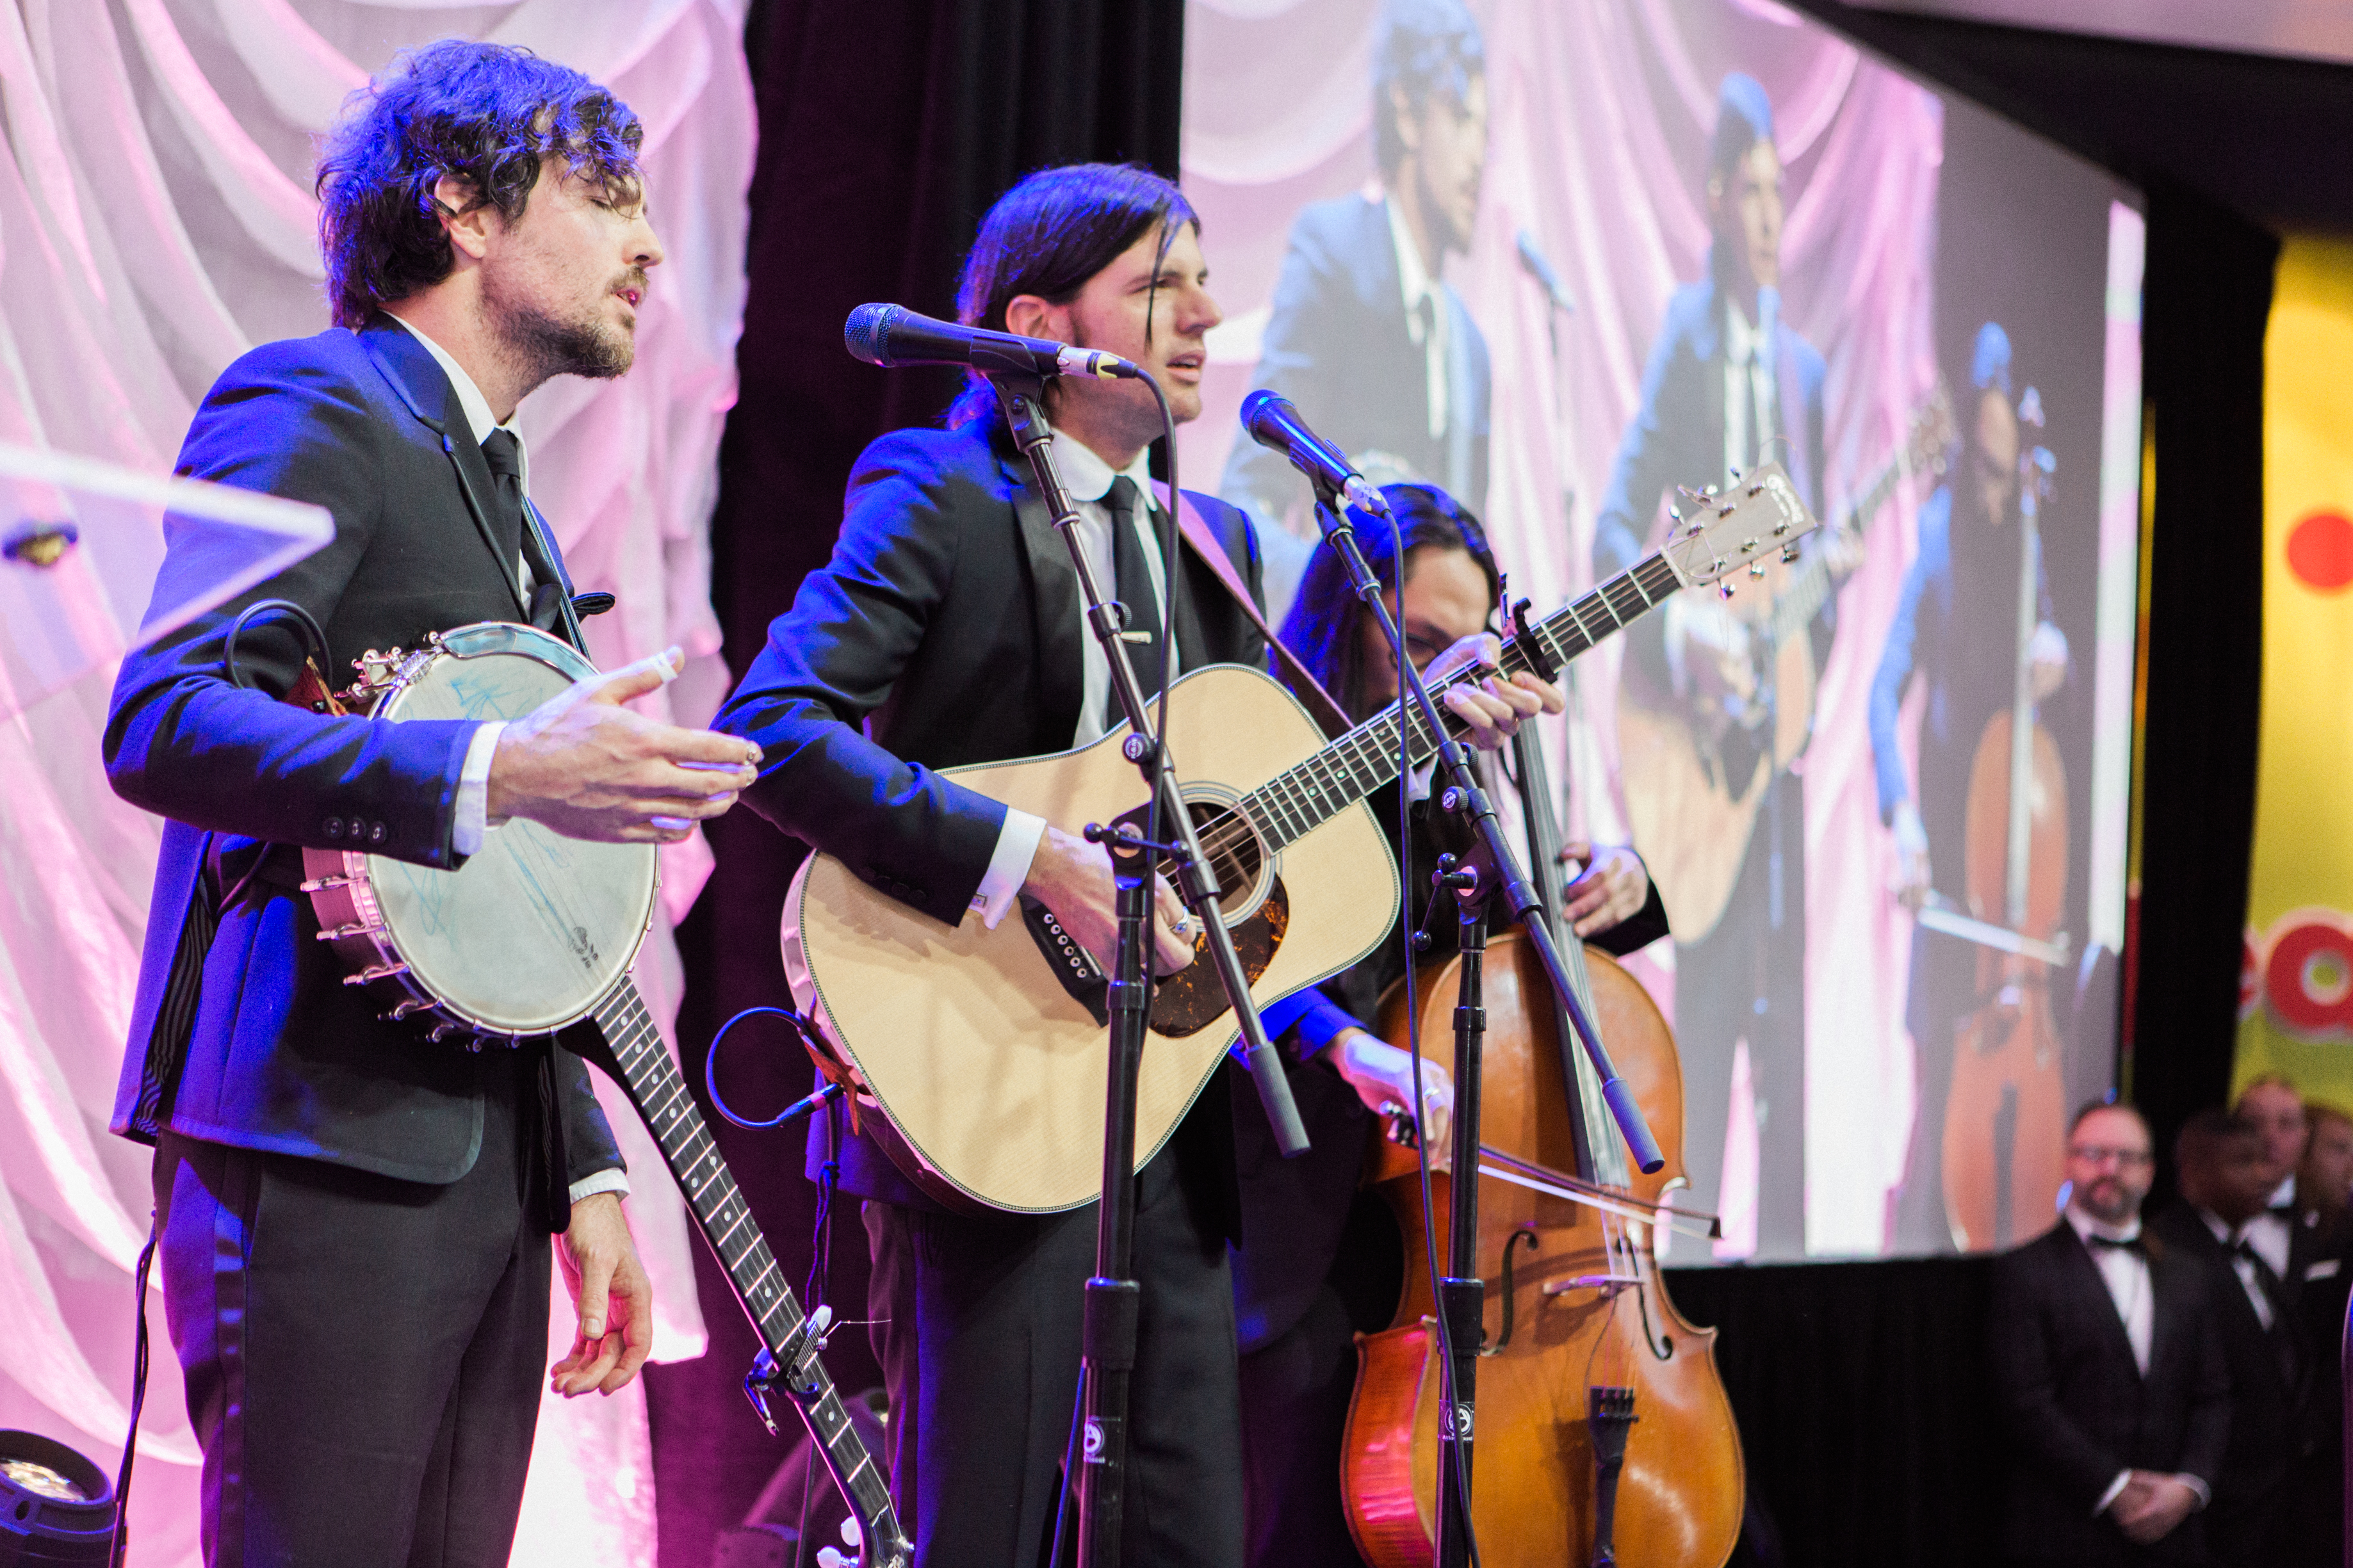 The Avette Brothers at NC Governors Inaugural Ball